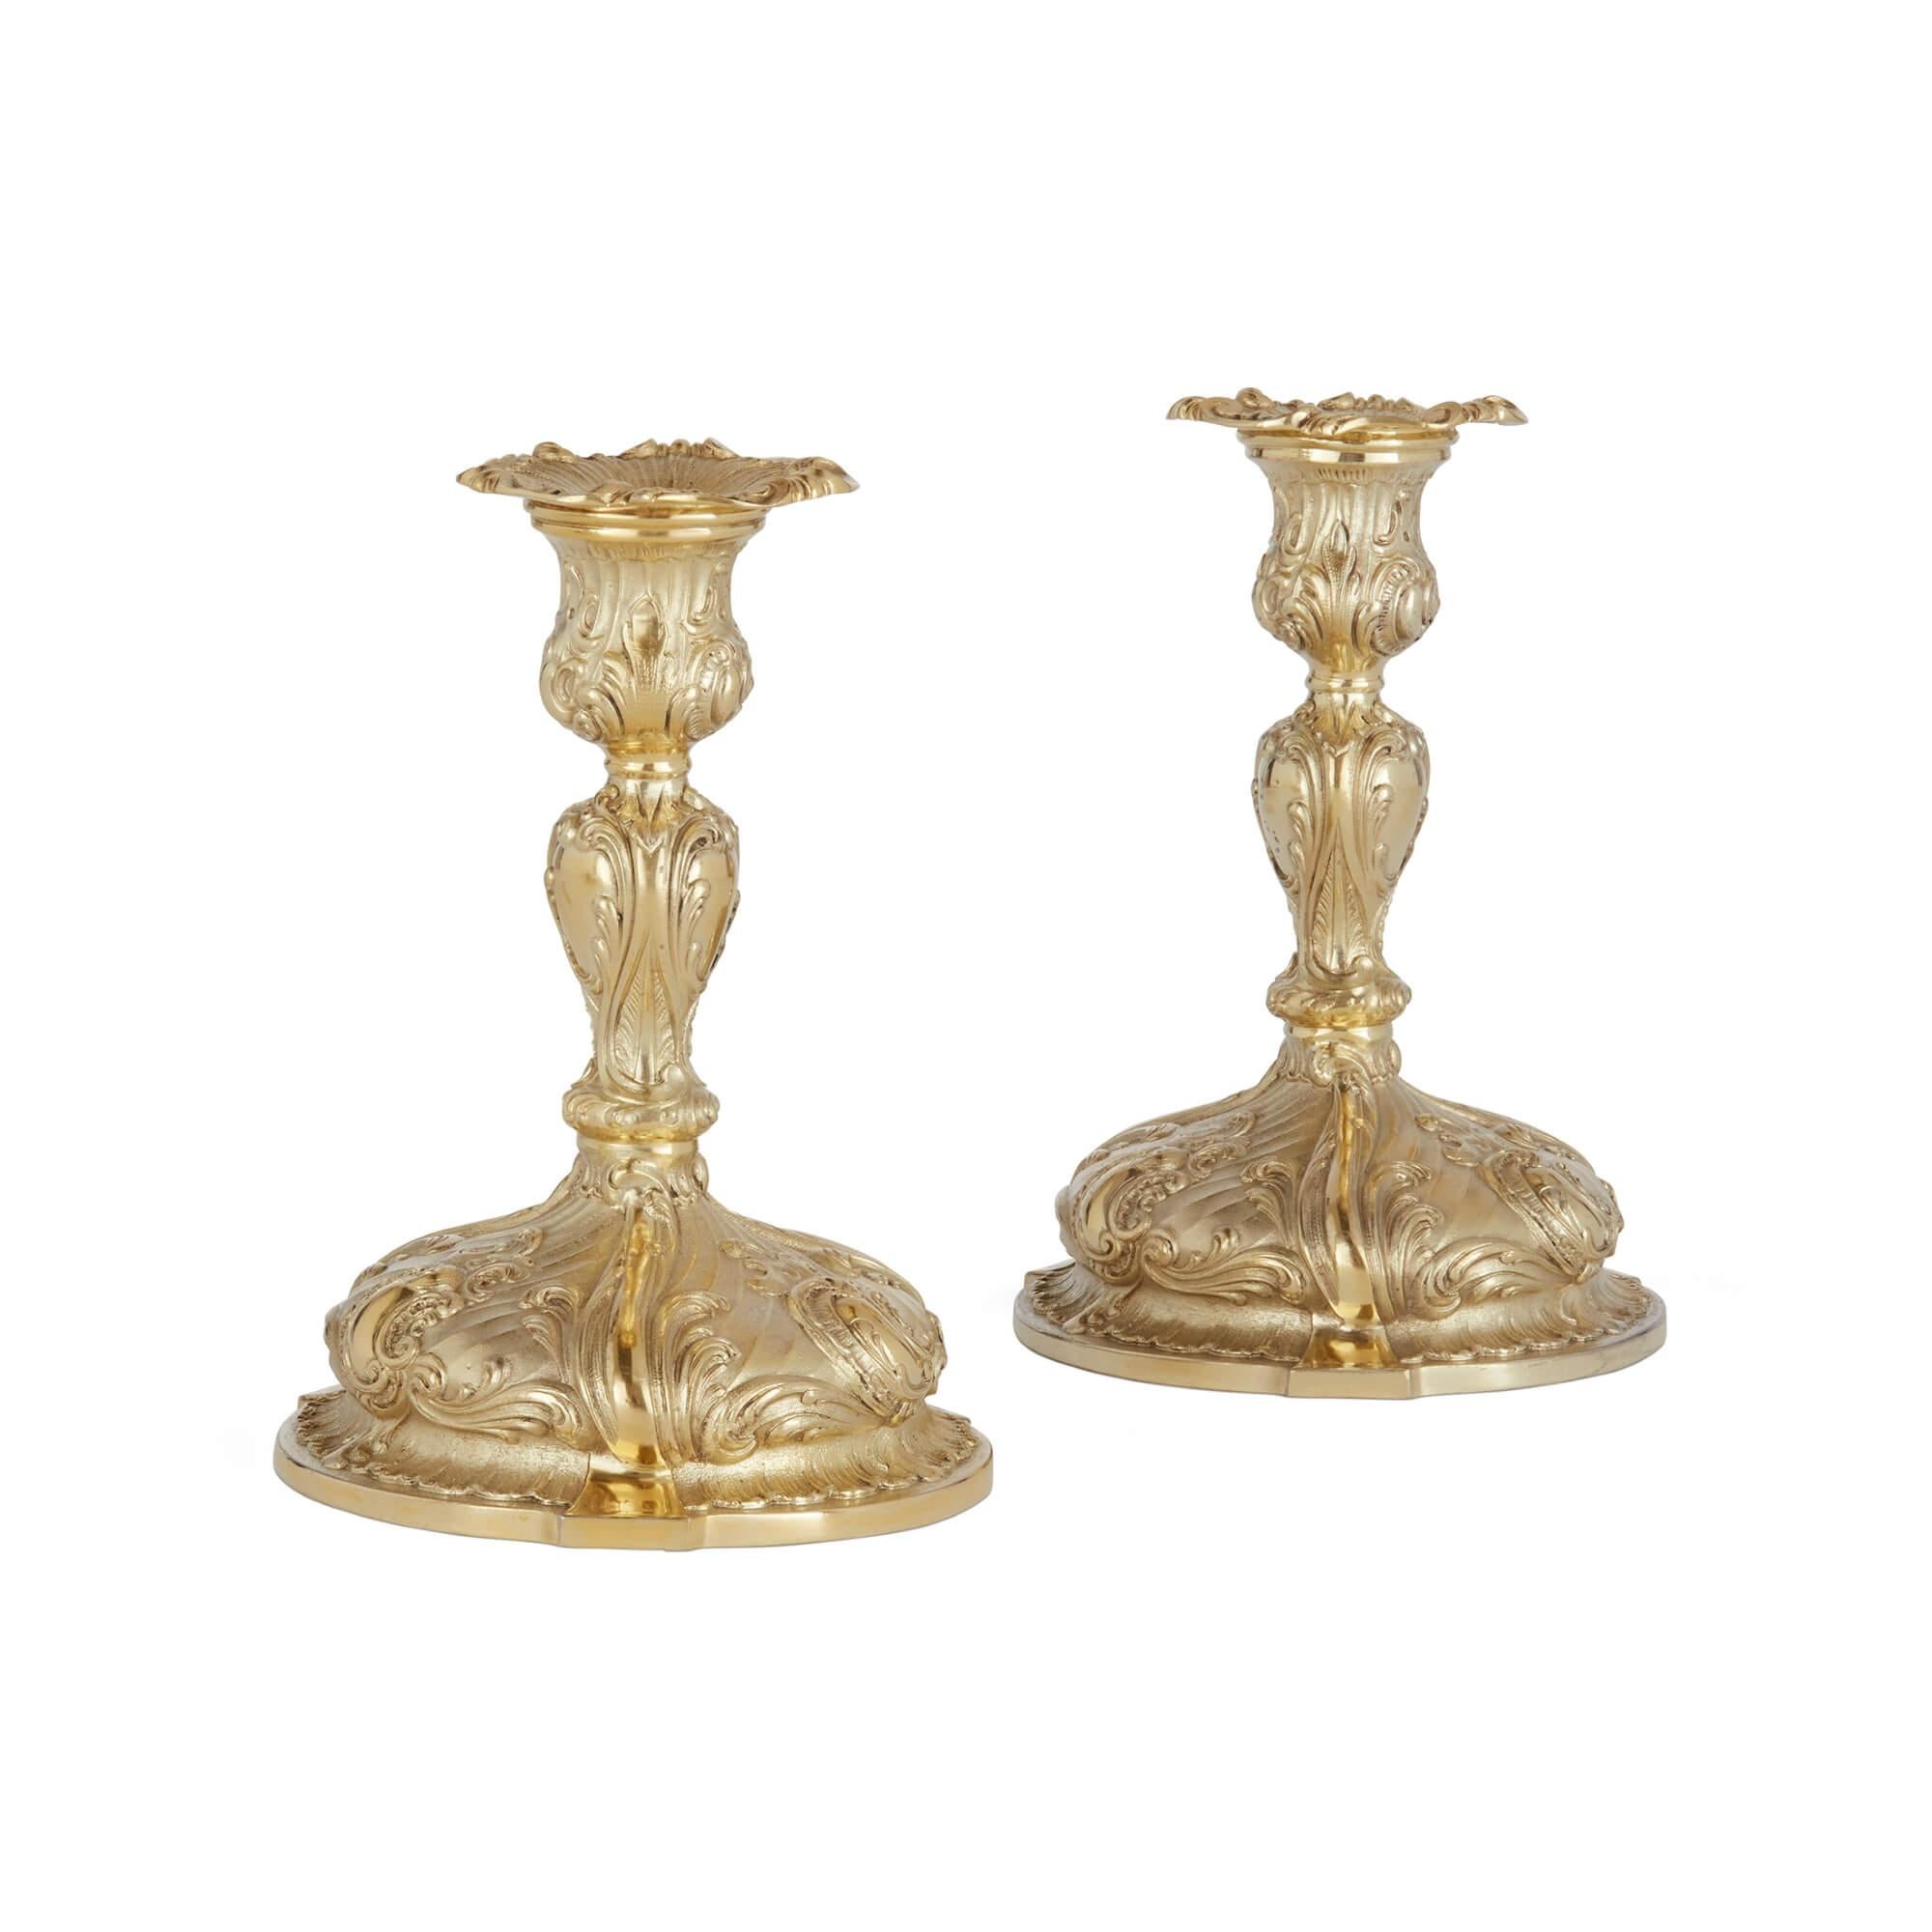 Pair of silver gilt 3-branch candelabra 
Continental, 20th Century 
Height 27cm, width 28cm, depth 12cm

These superb silver gilt candelabra were crafted in the 20th century and their design is inspired by the charming Rococo style. 

The central